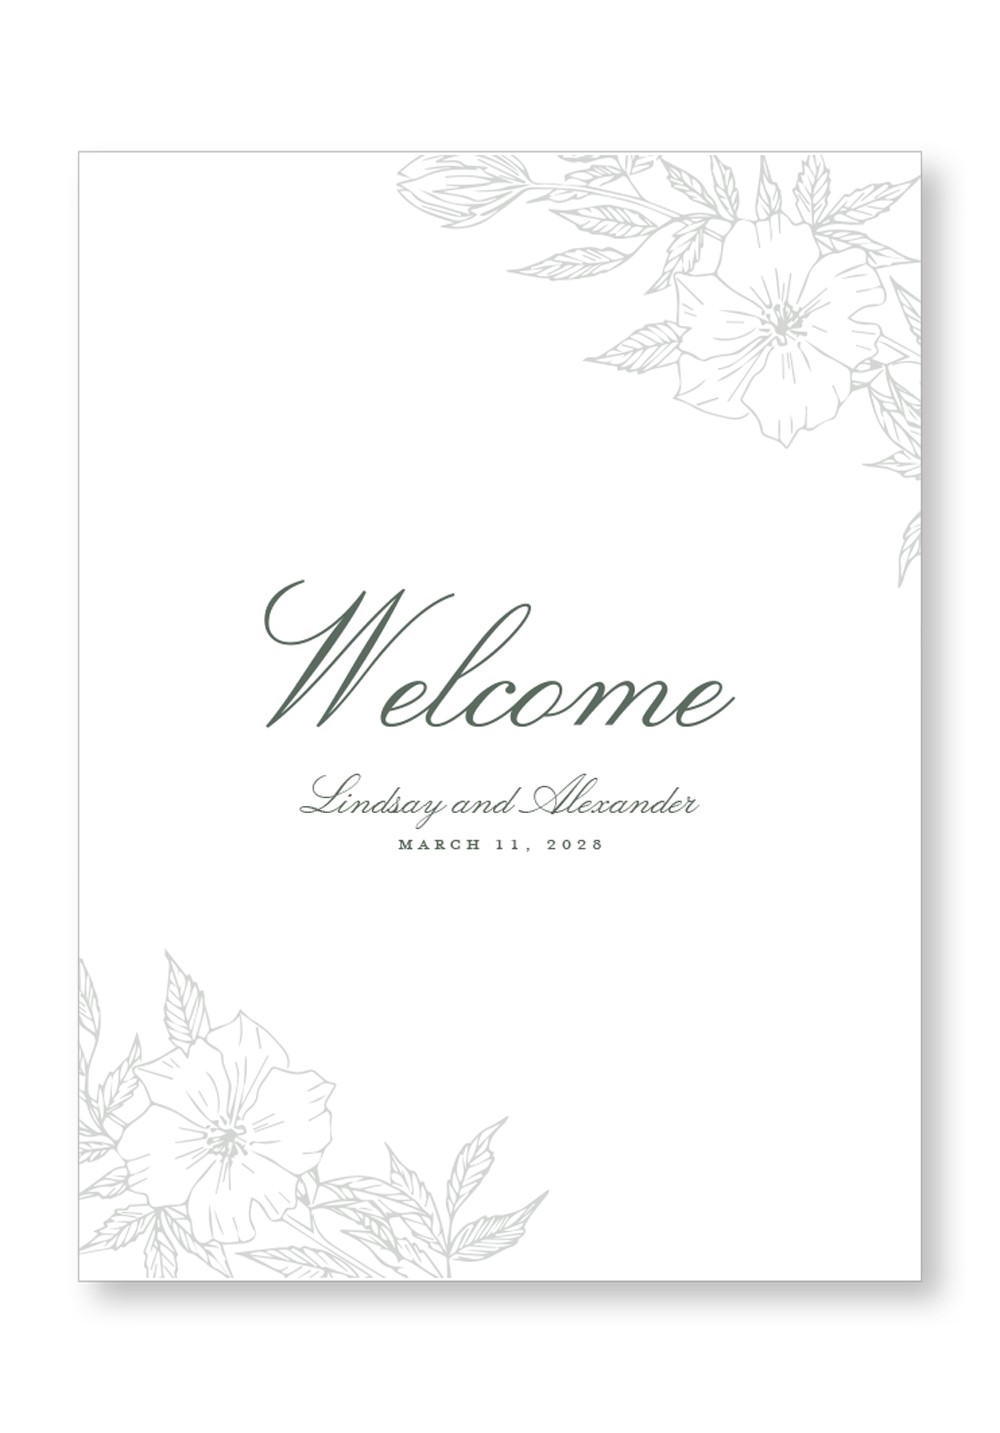 Rosemary Ceremony & Reception Large Signage | Paper Daisies Stationery